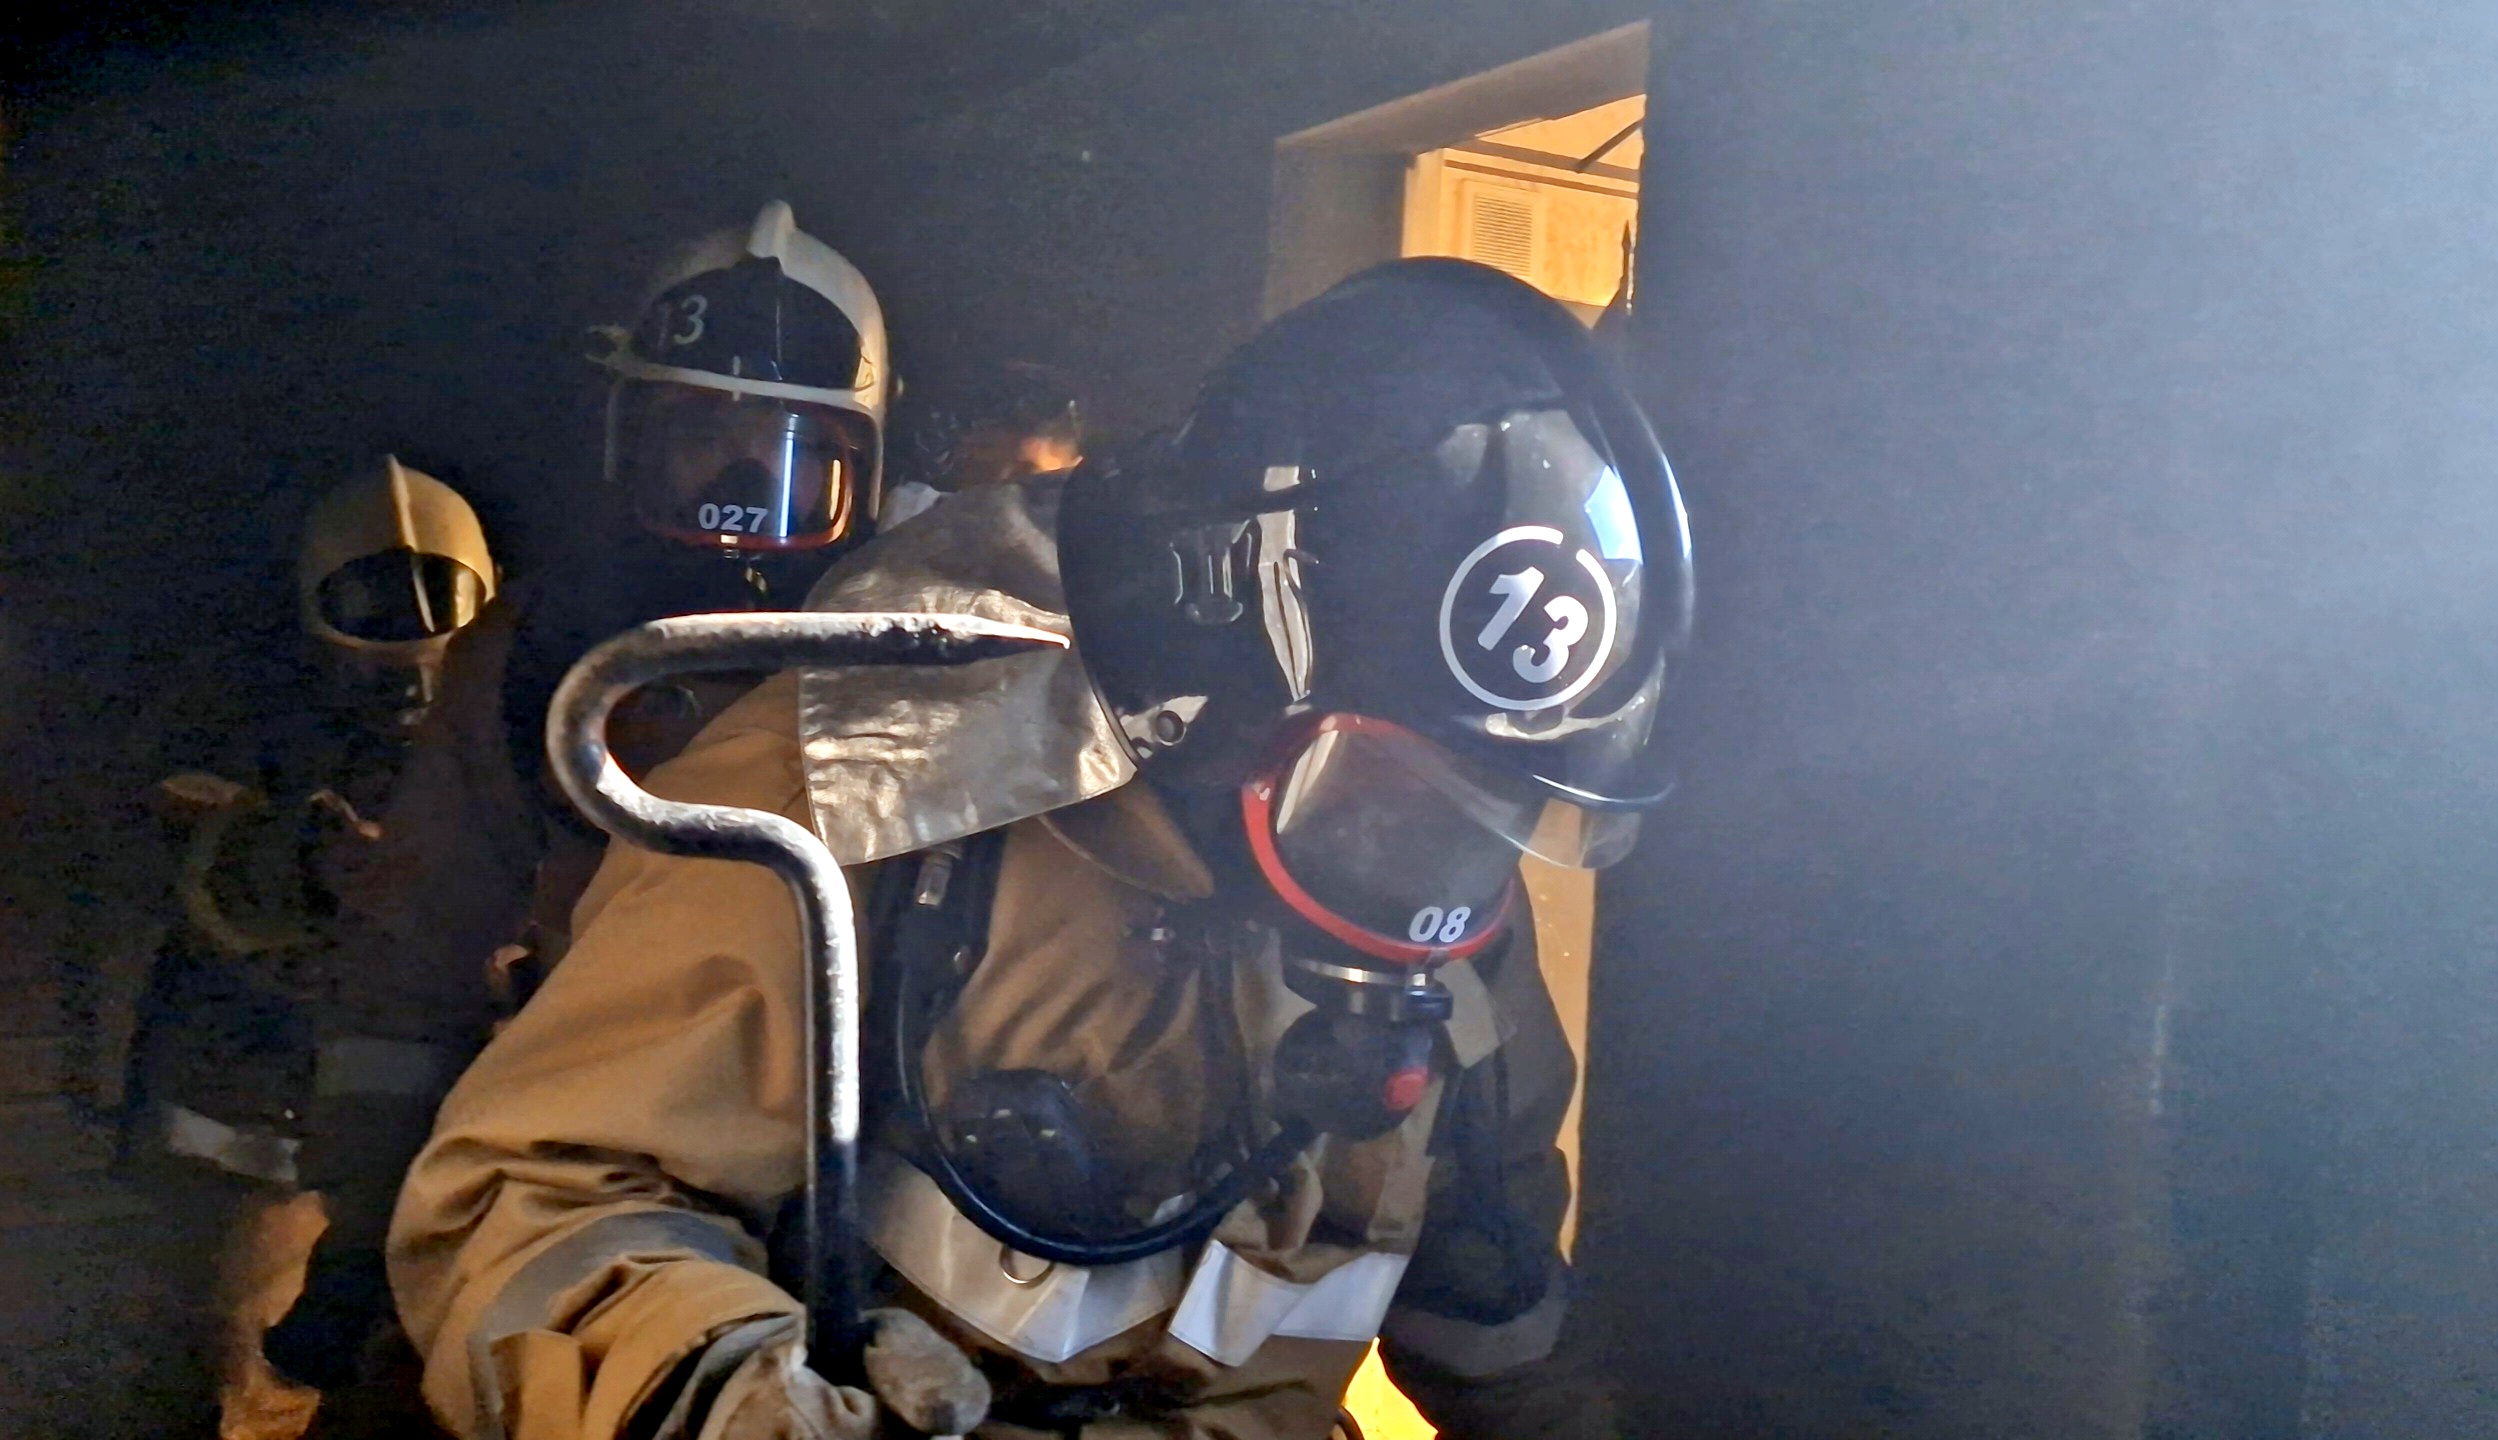 Fire-tactical exercise in the residential complex "Florence"